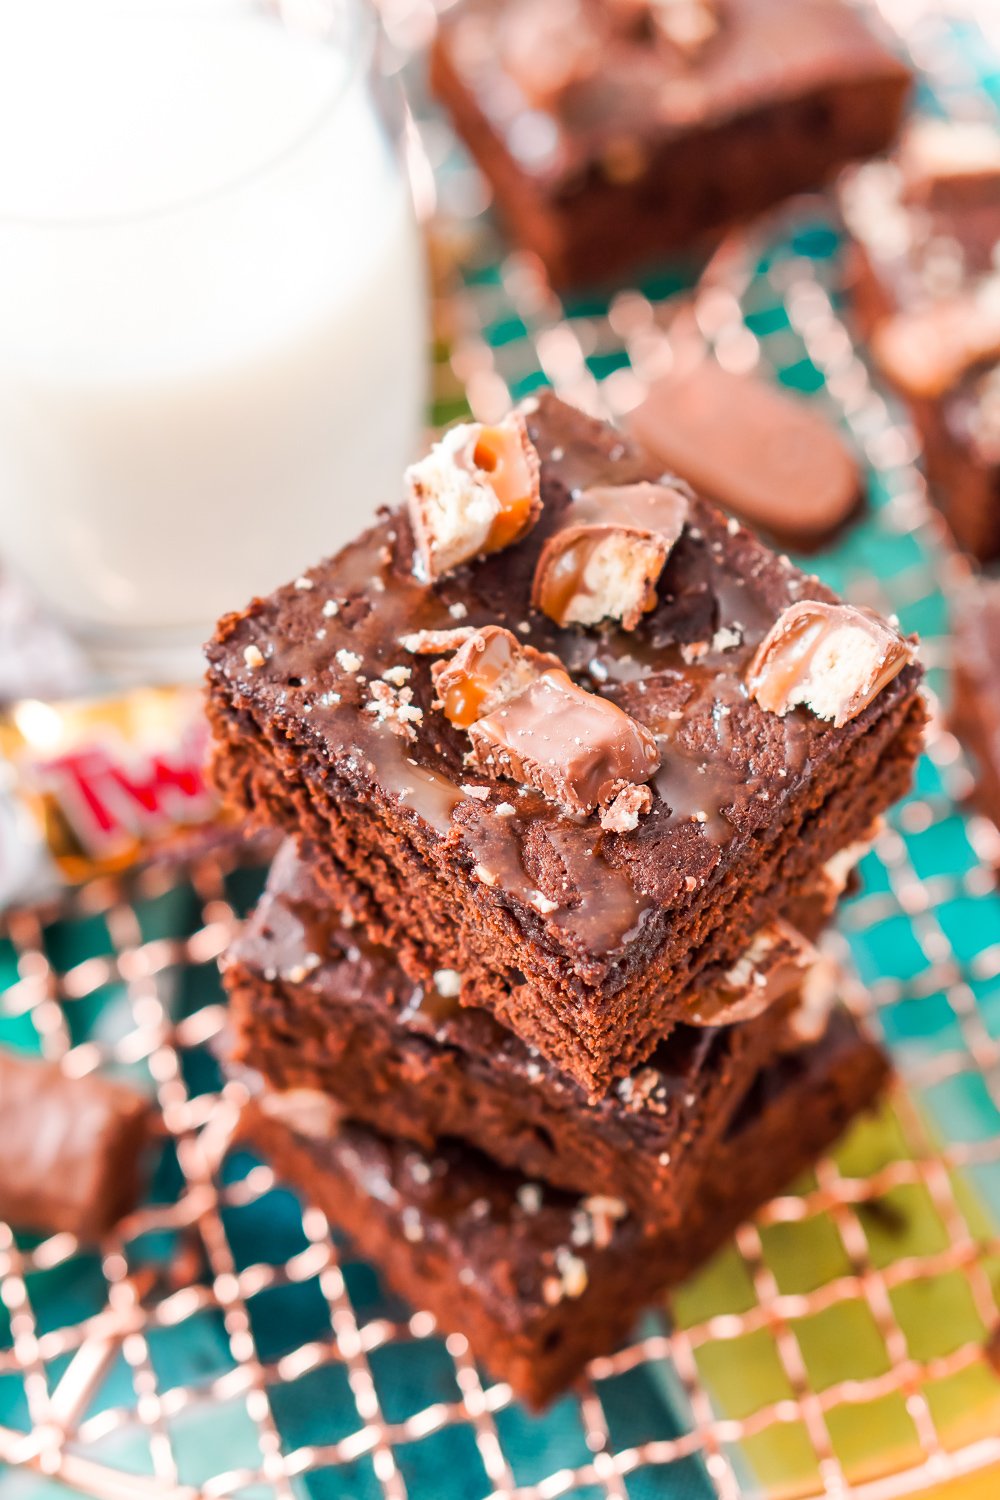 These Twix Caramel Brownies are a delicious cake-like chocolate brownie with Twix candy bars baked in, then drizzled with caramel and topped with more candy bar crumbles.